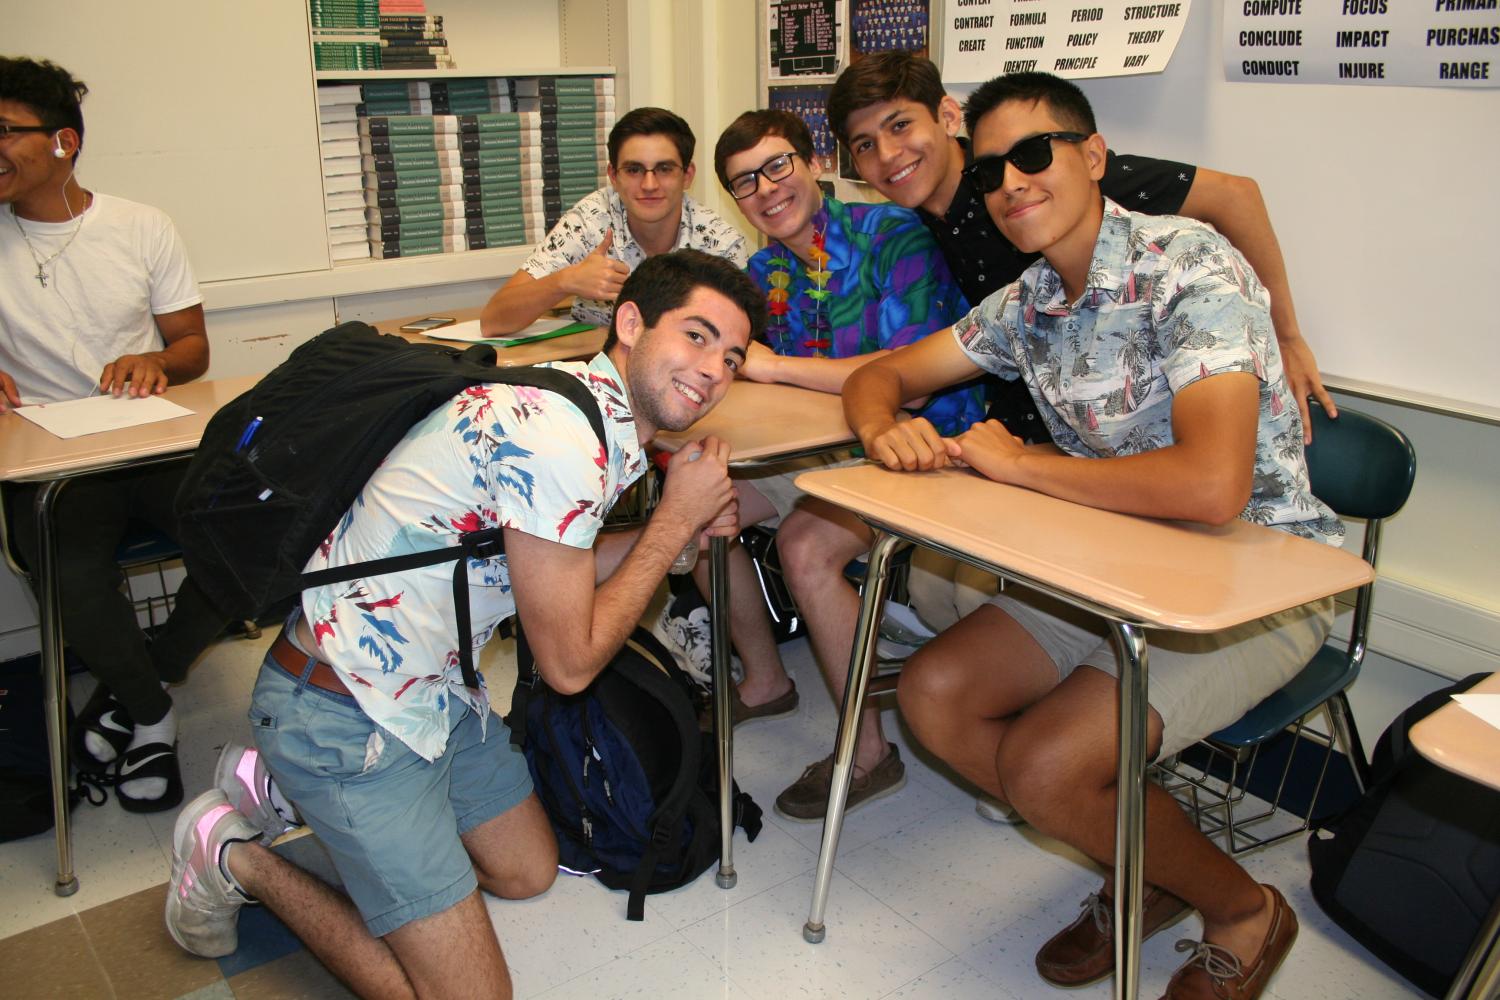 Students dress up for Tropical Tuesday.